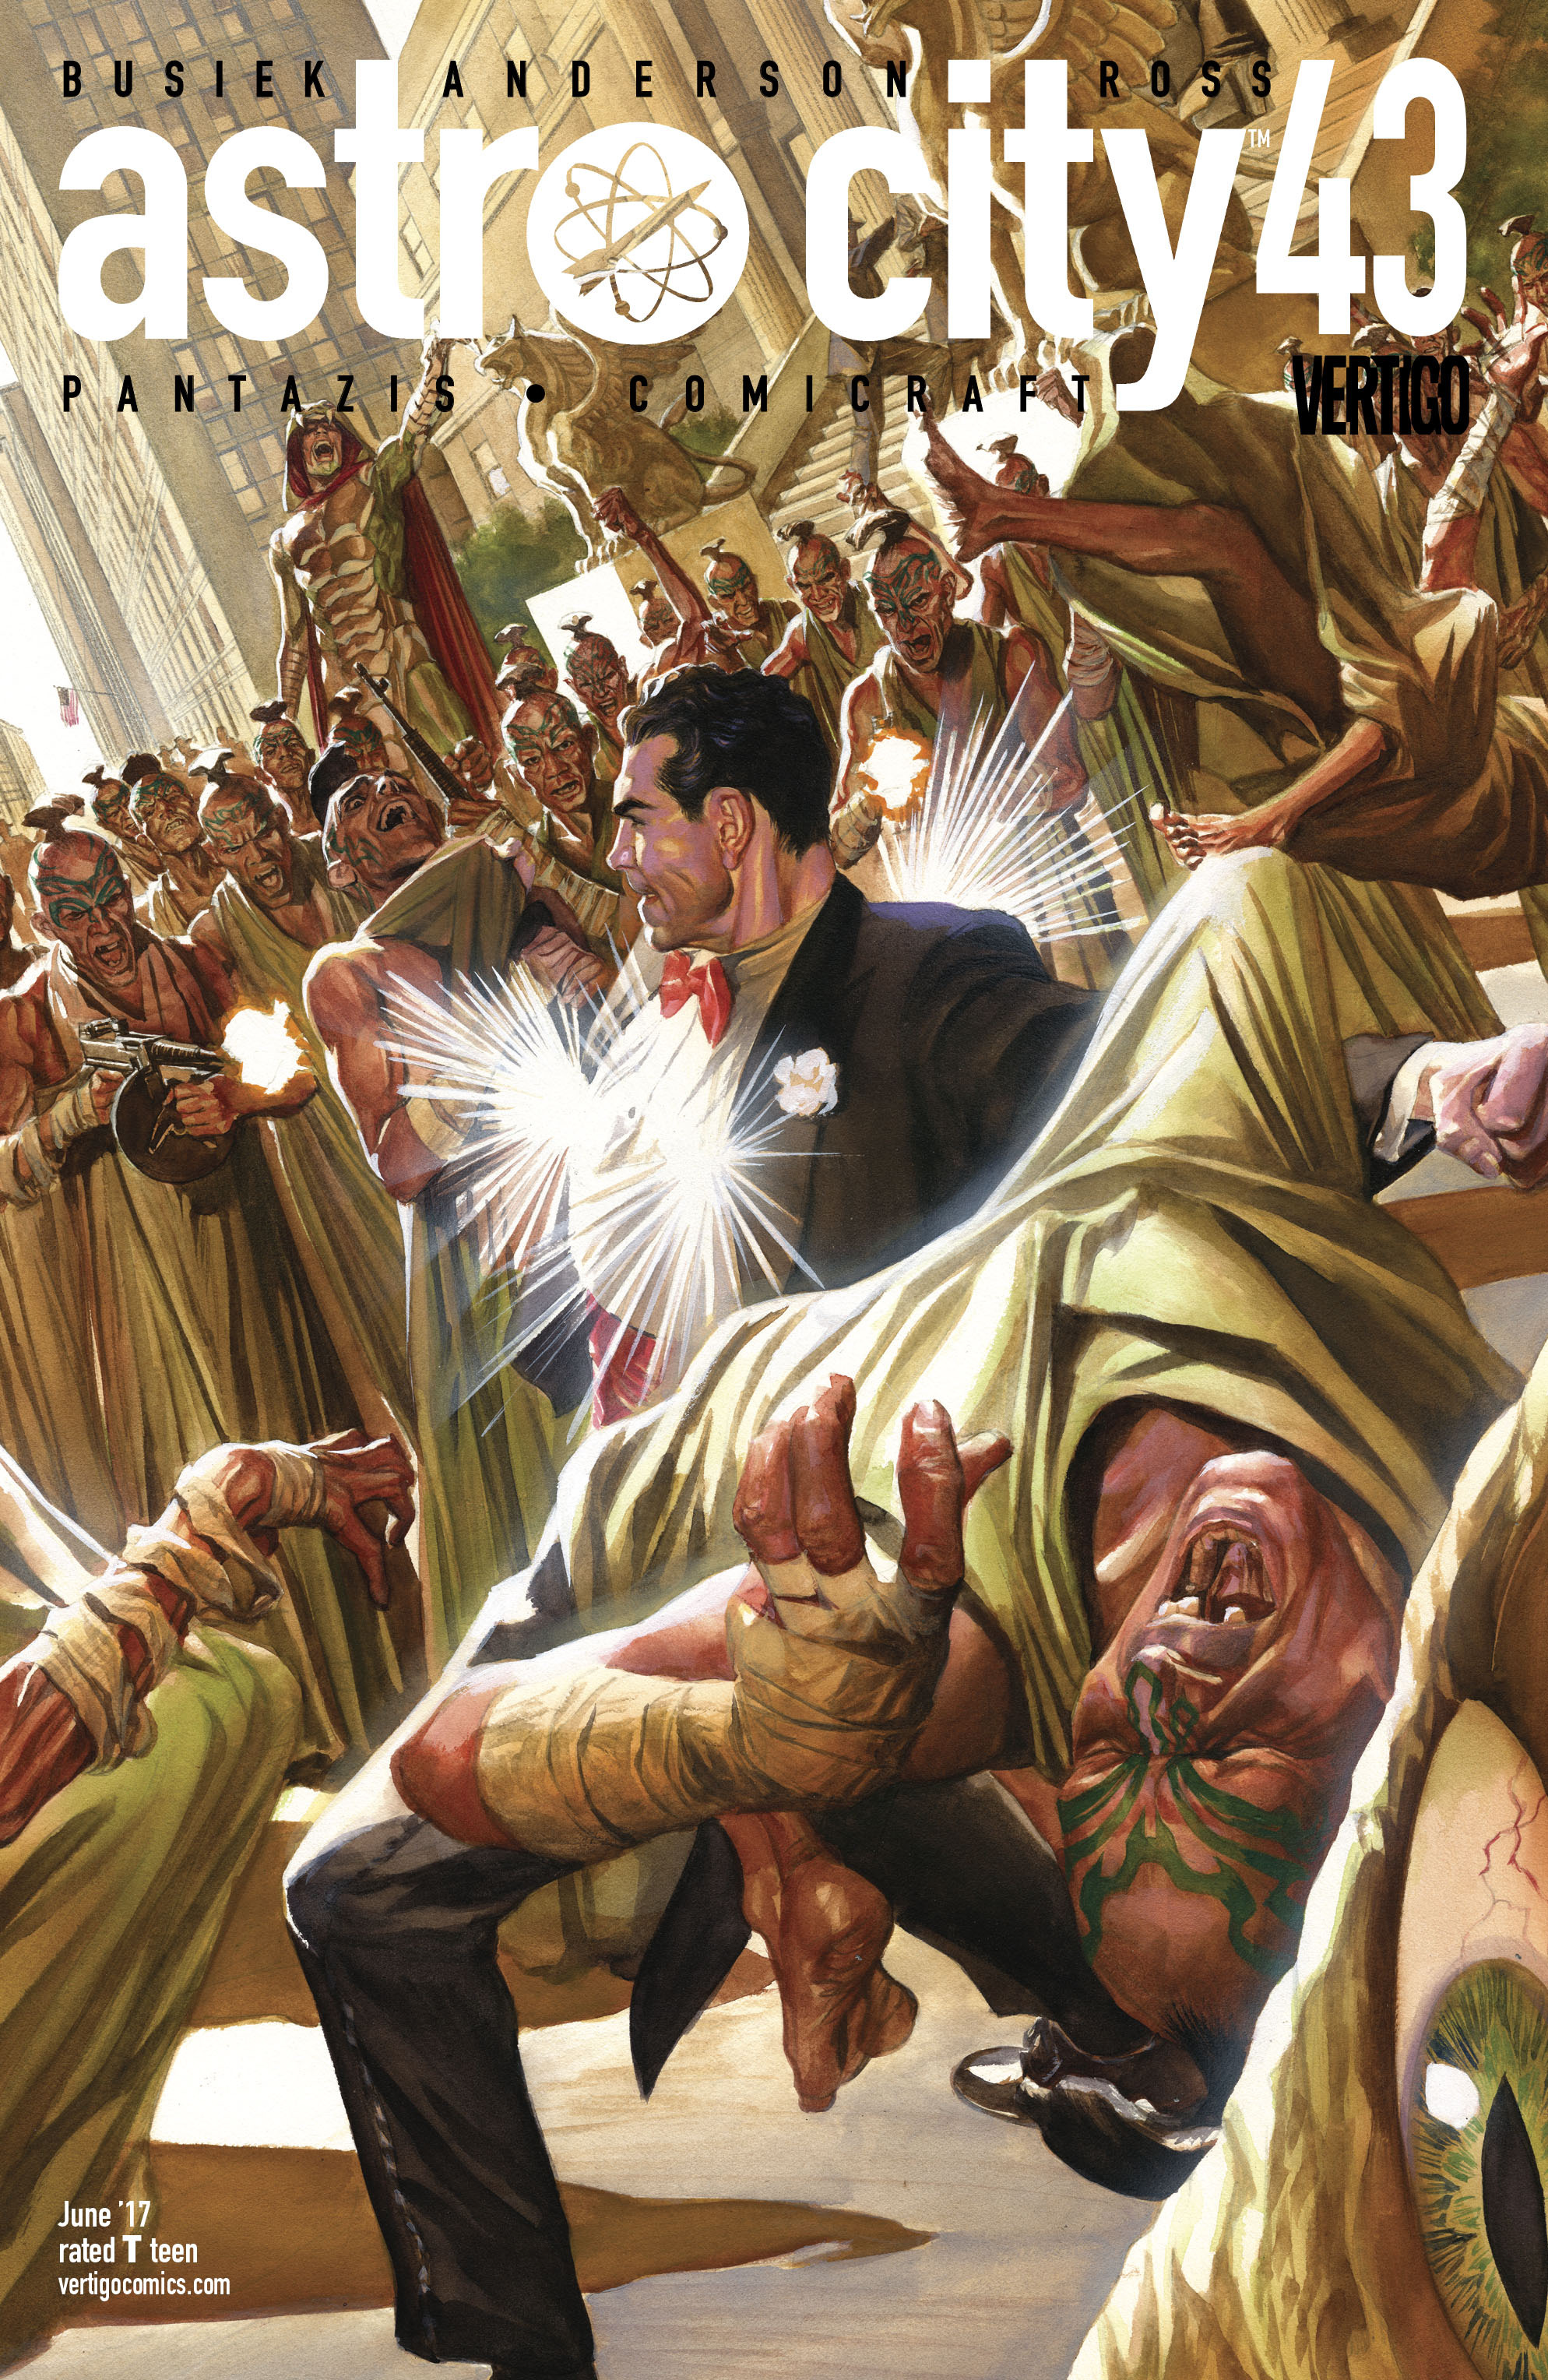 Astro City (2013-): Chapter 43 - Page 1